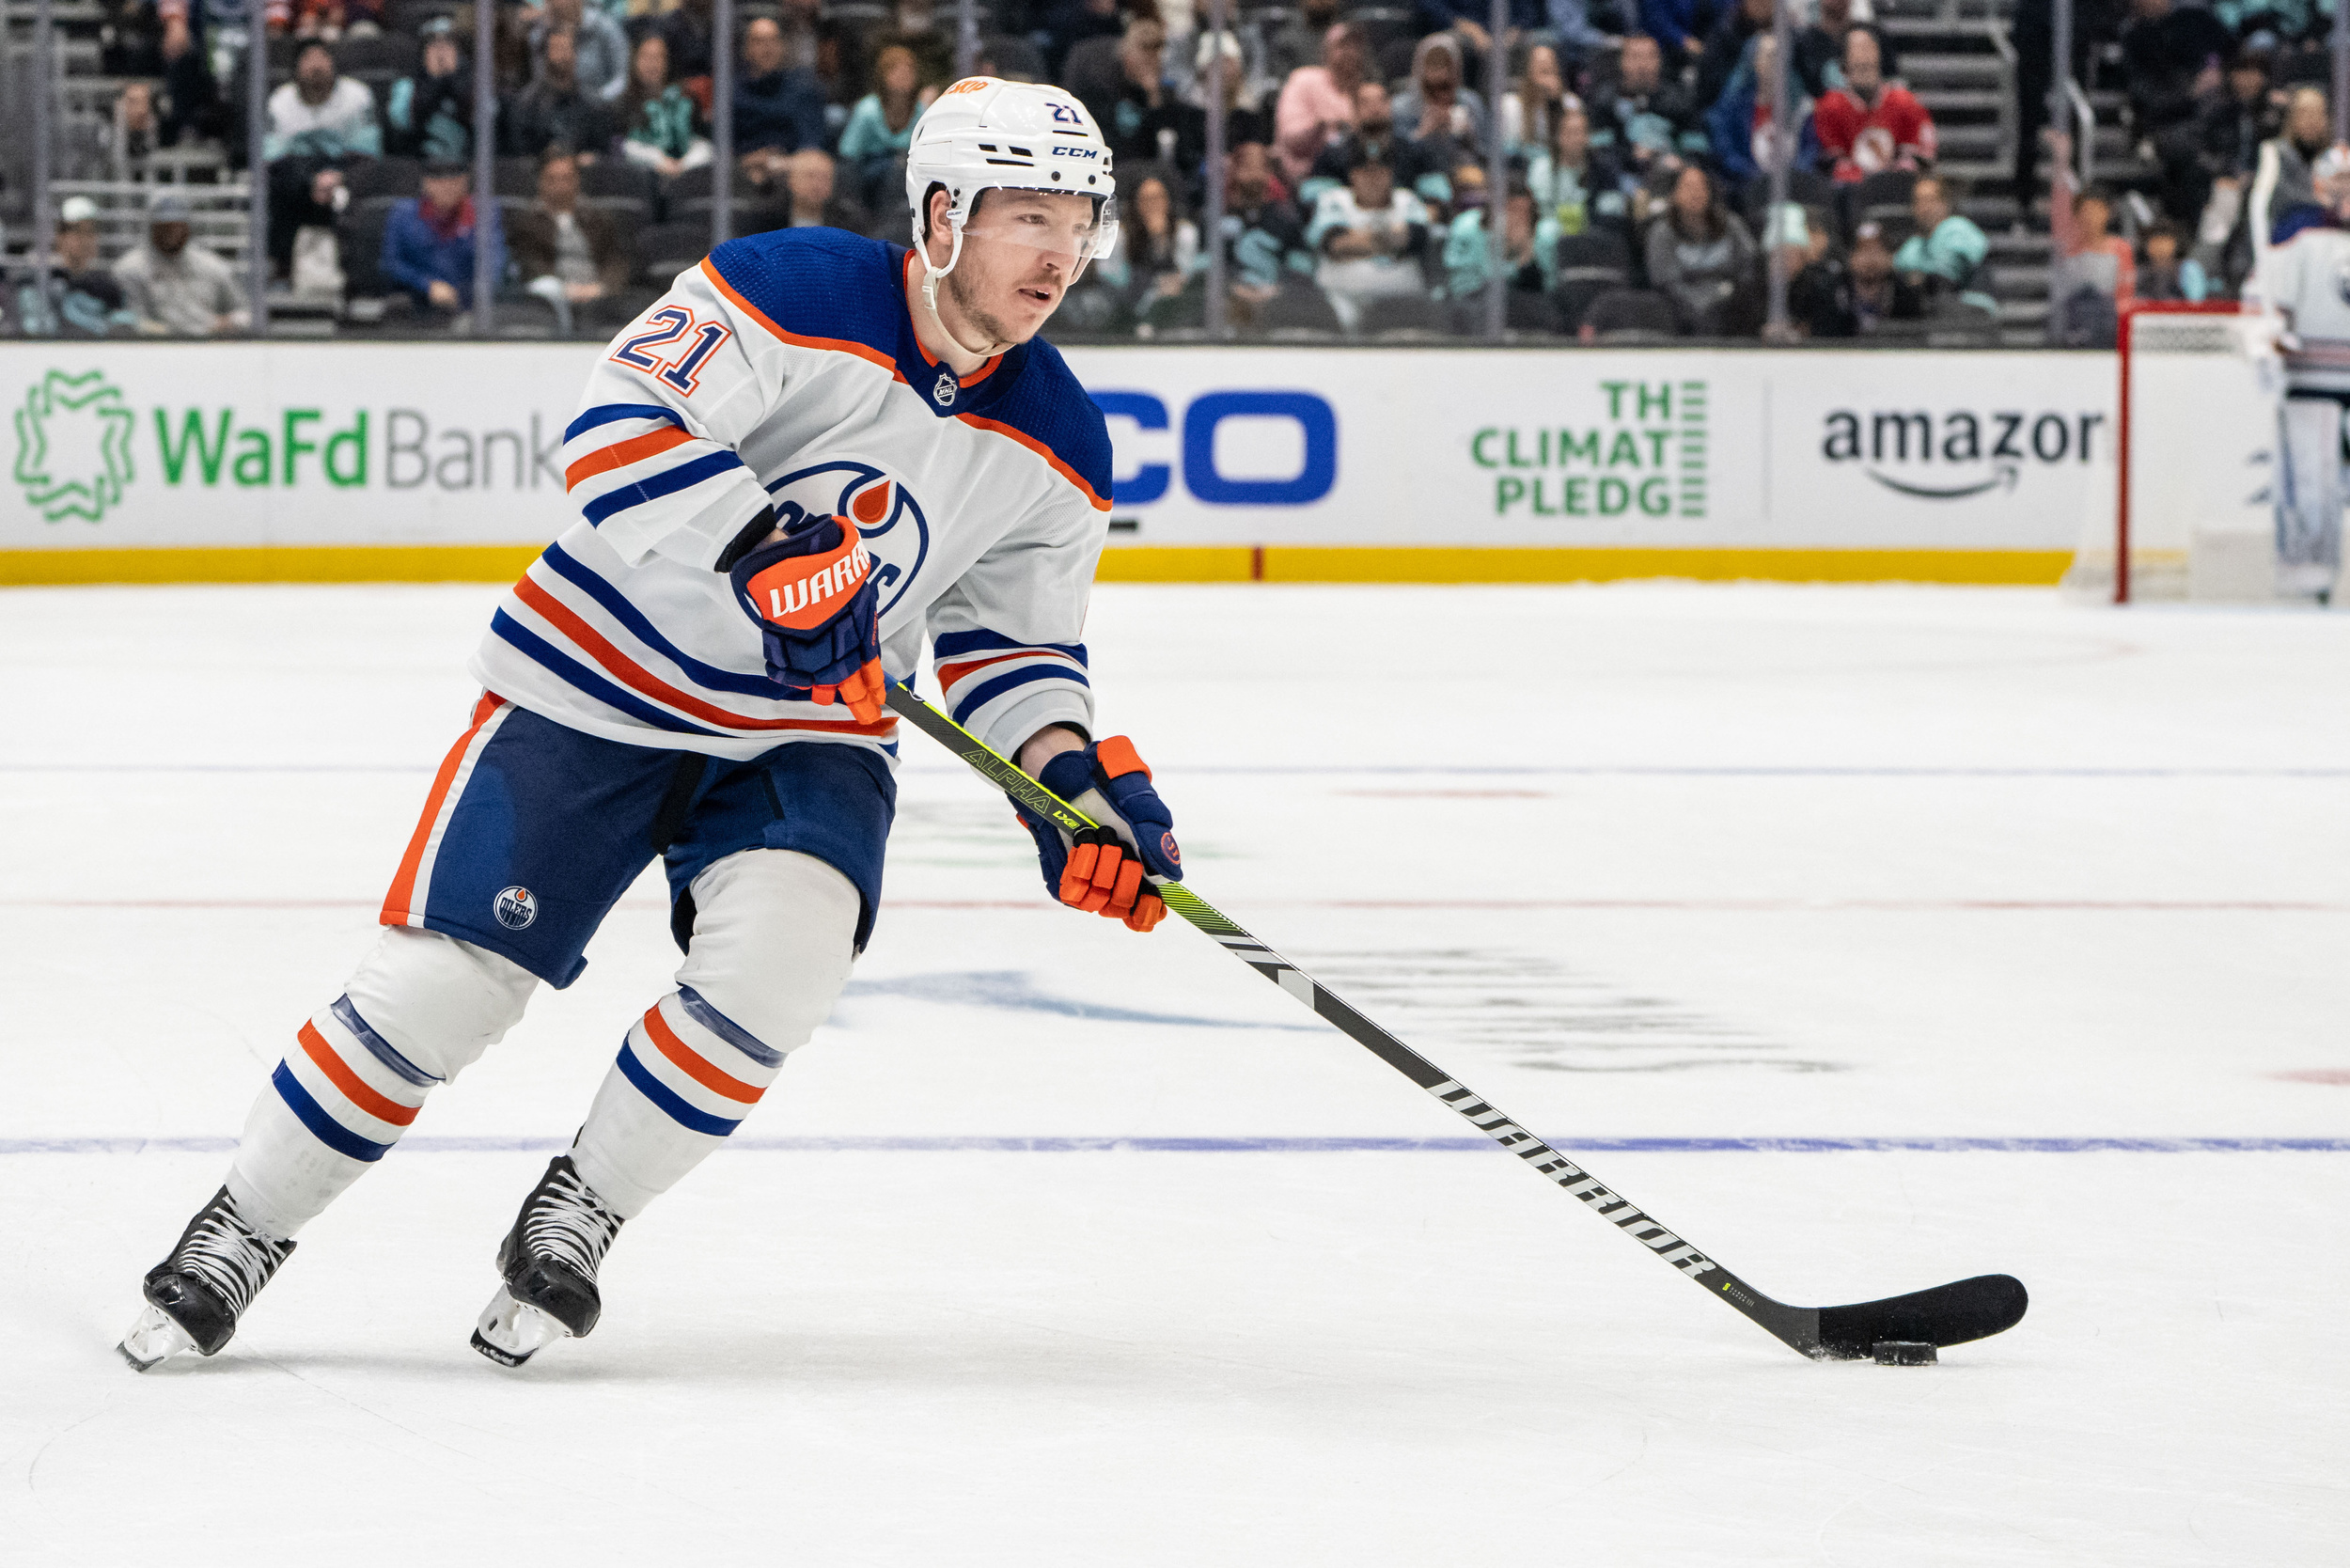 oilers place veteran winger on waivers